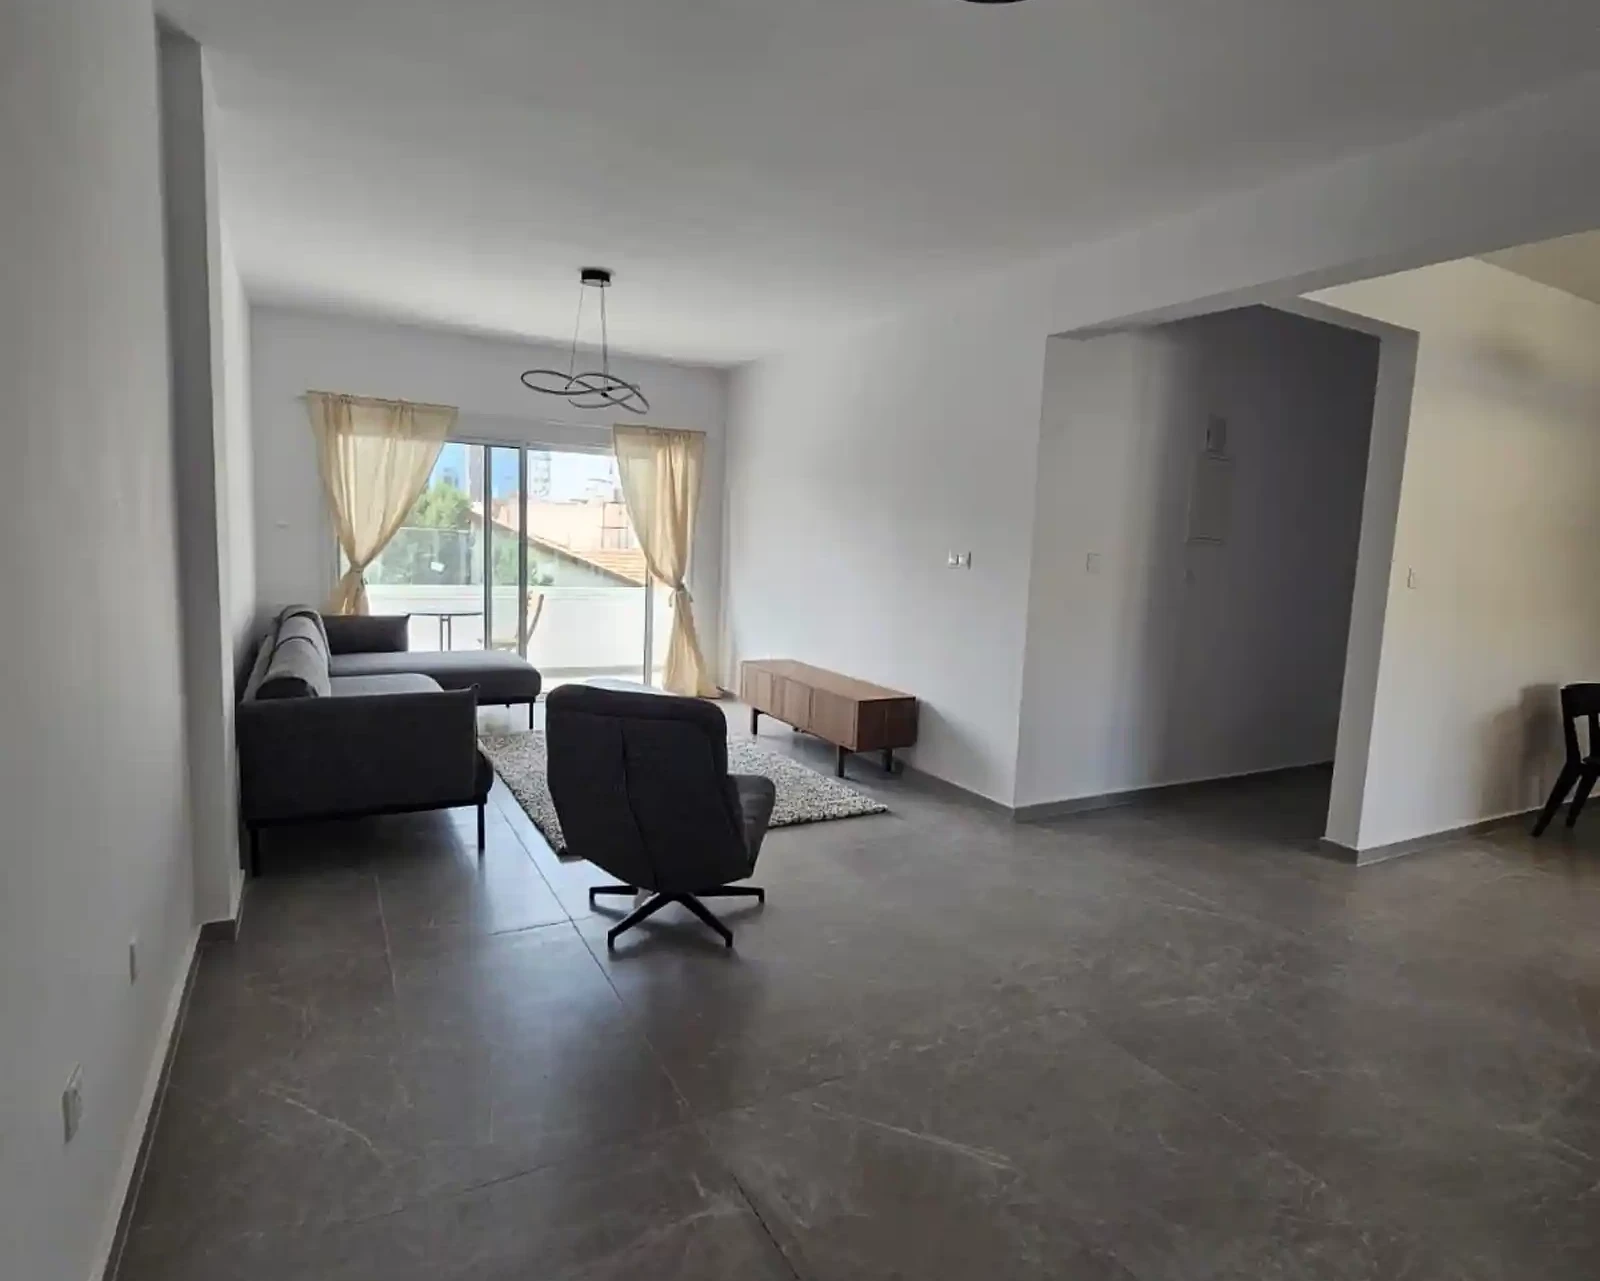 3-bedroom apartment fоr sаle €340.000, image 1